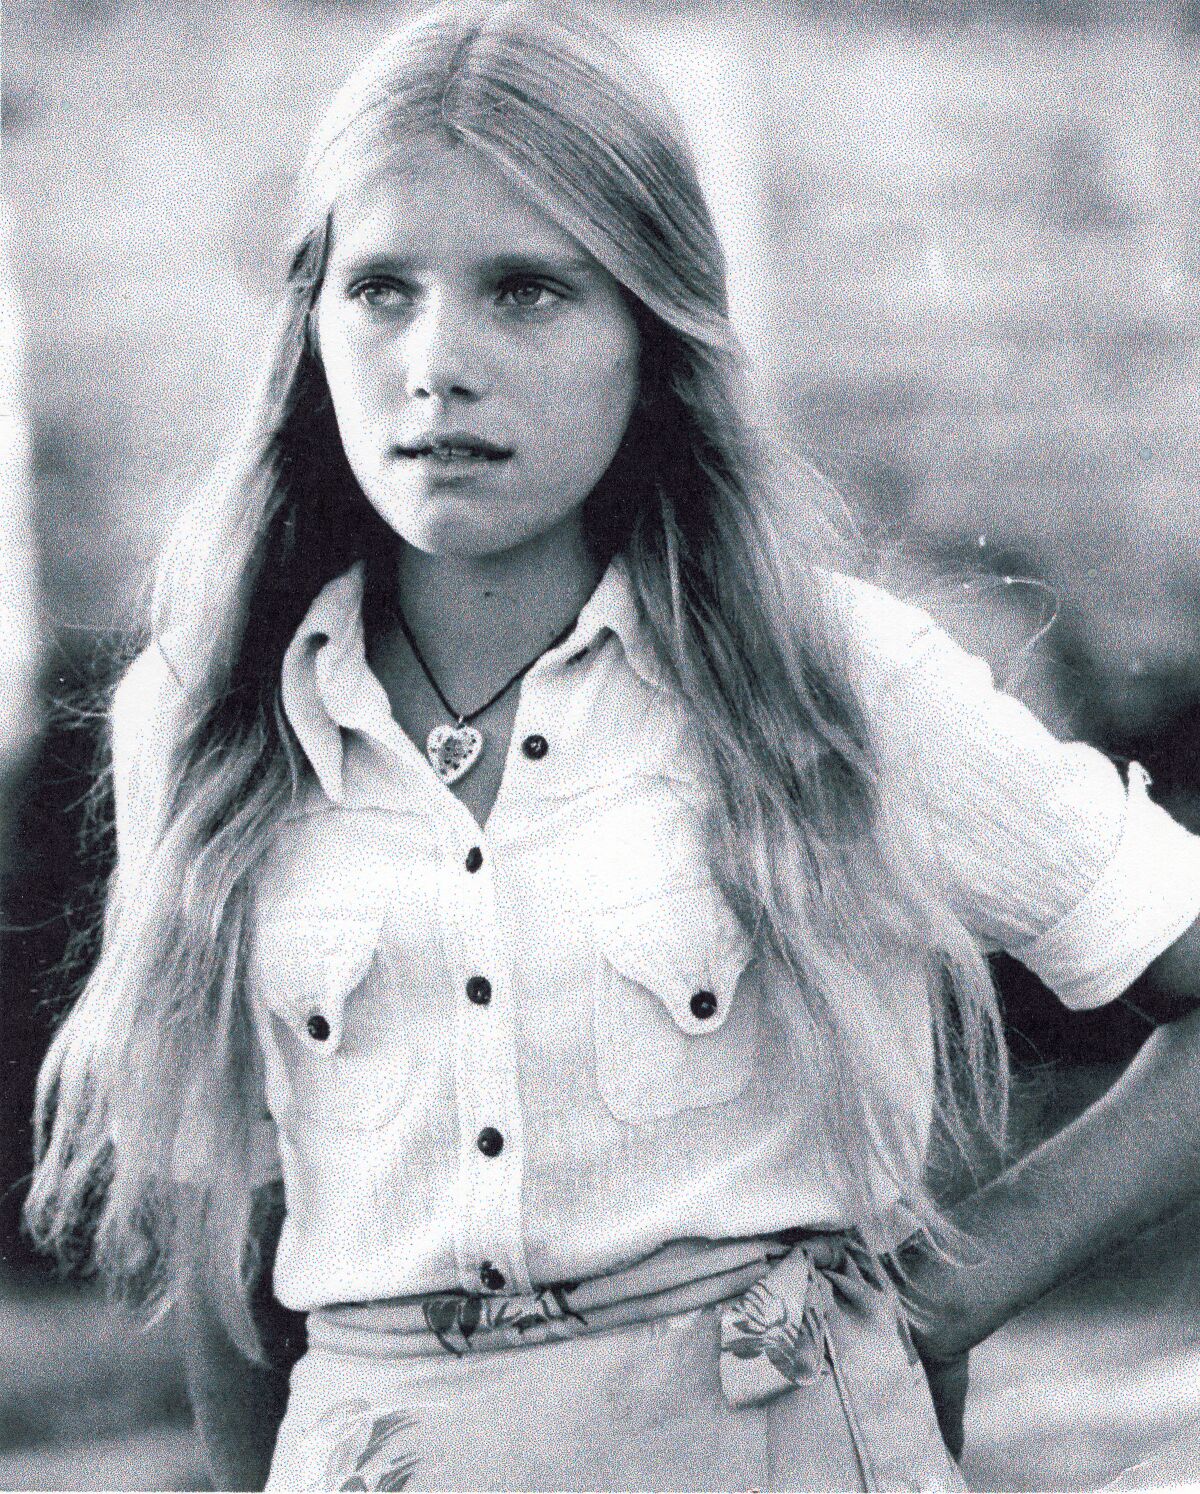 A black-and-white photo of a teen girl with long straight hair.